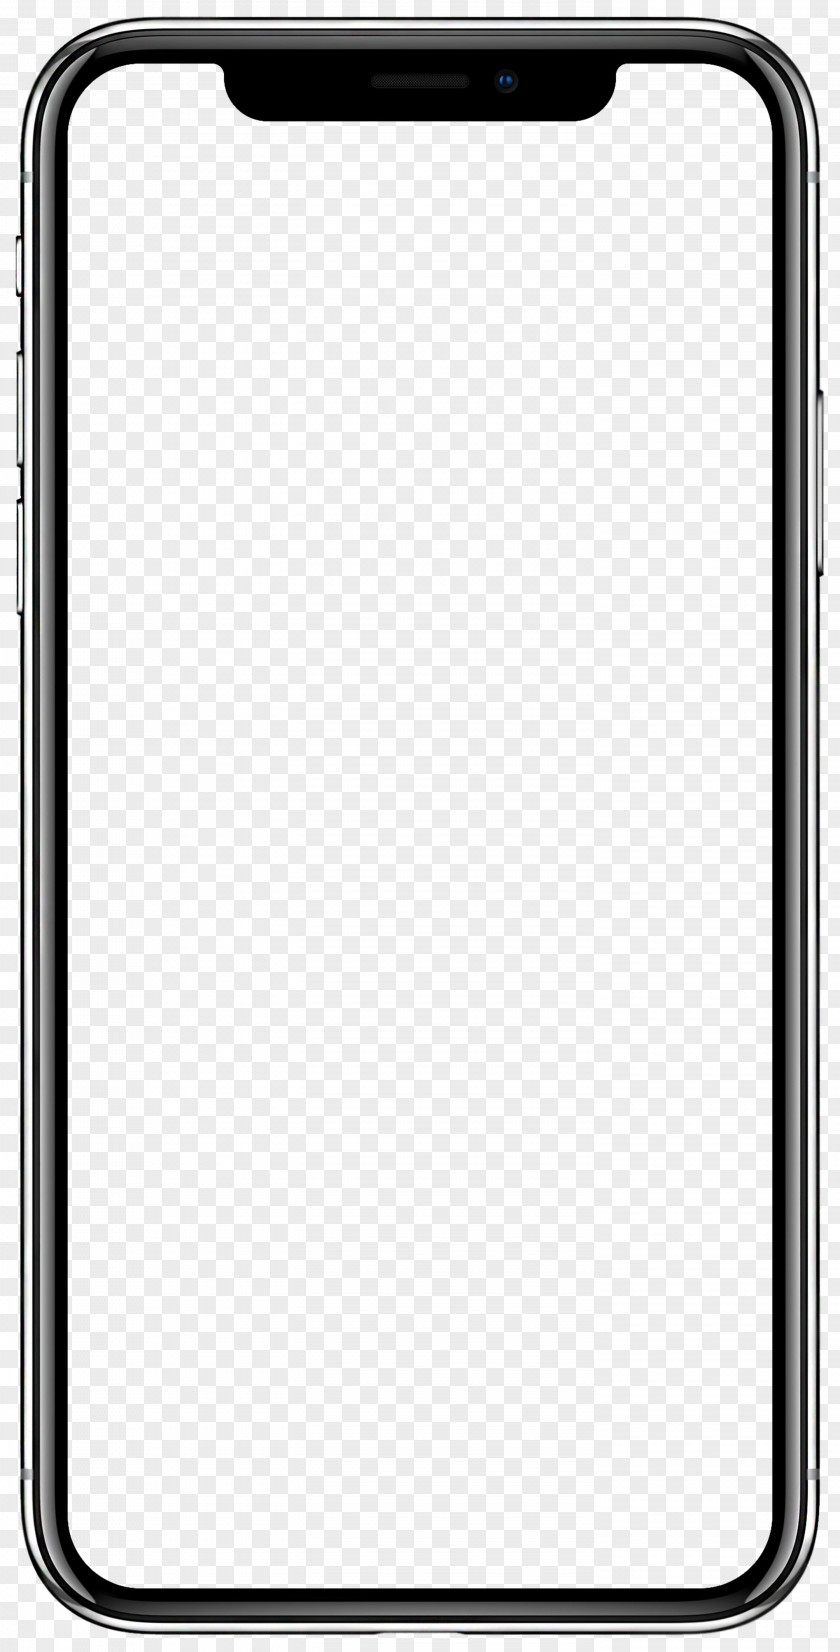 Apple IPhone X App Store IOS 11 PNG